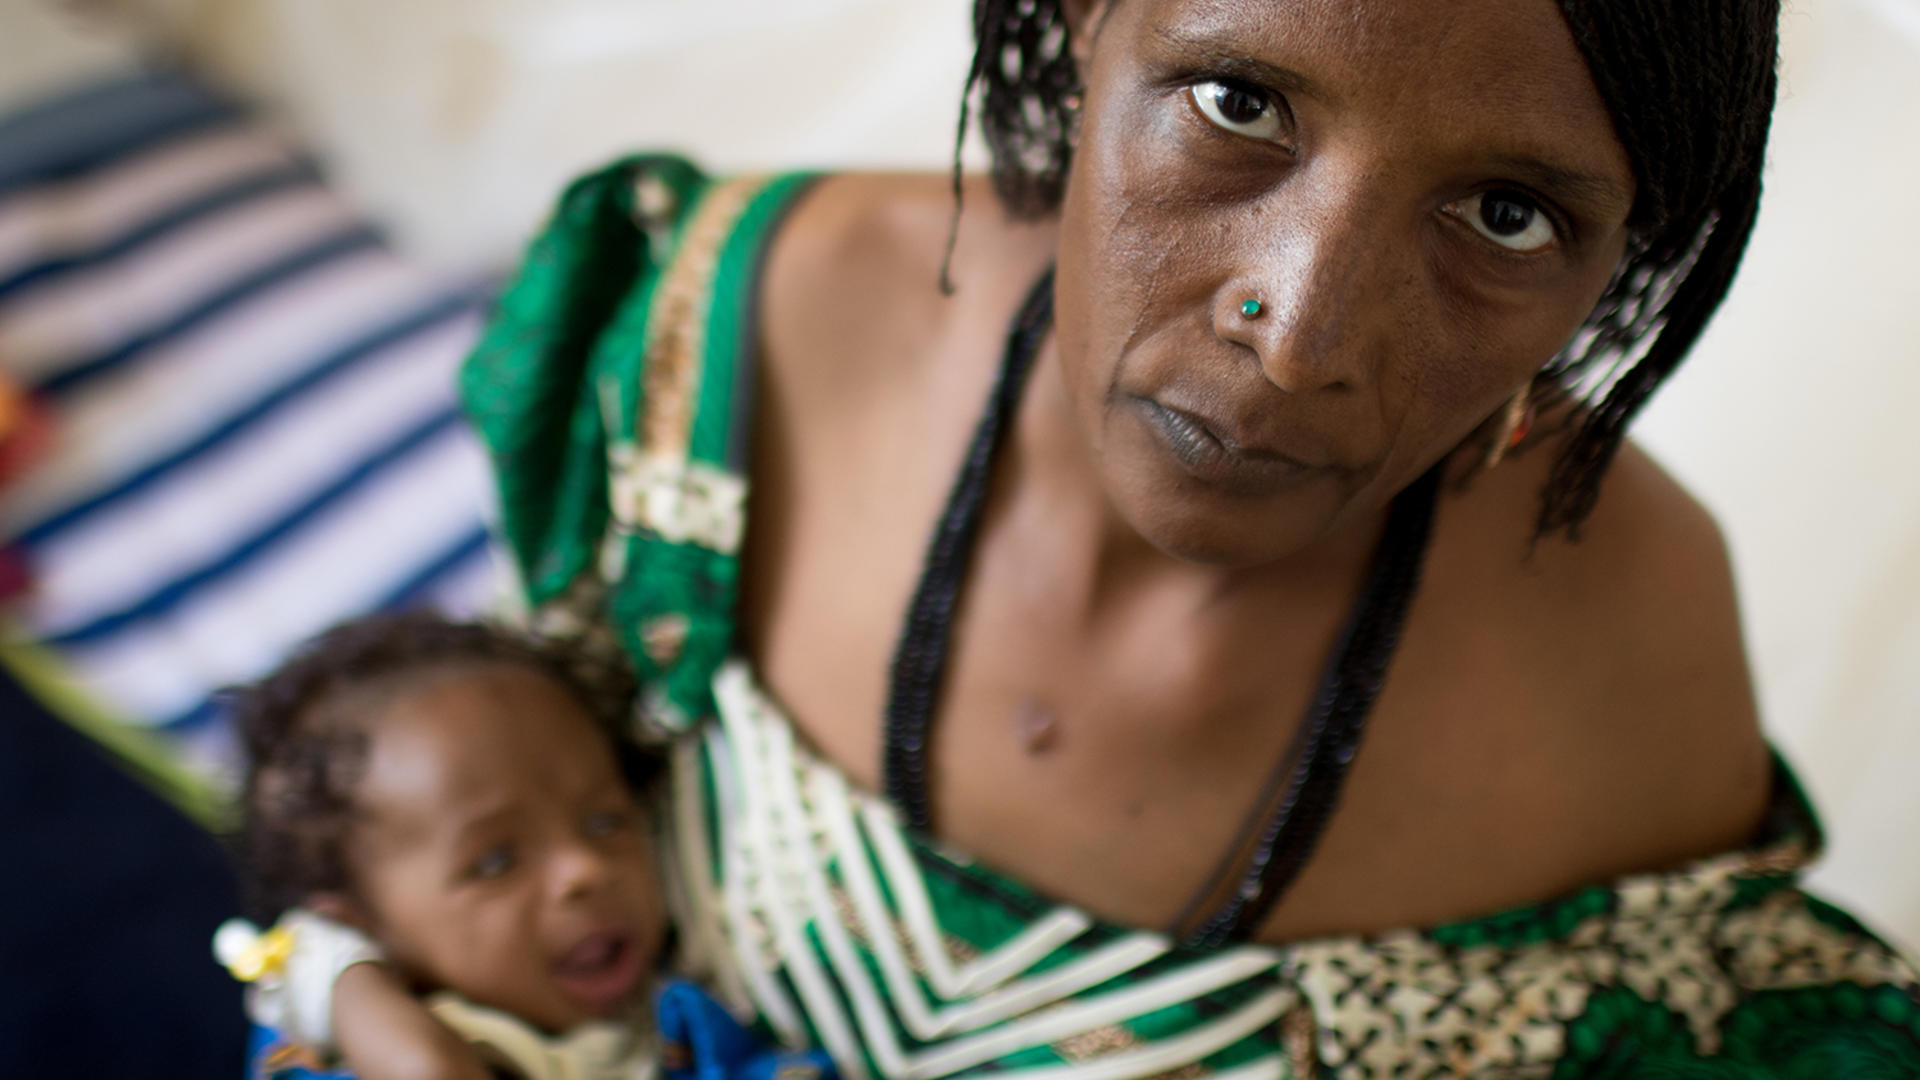 A mother and four-month-old baby at a malnutrition treatment center in Nigeria